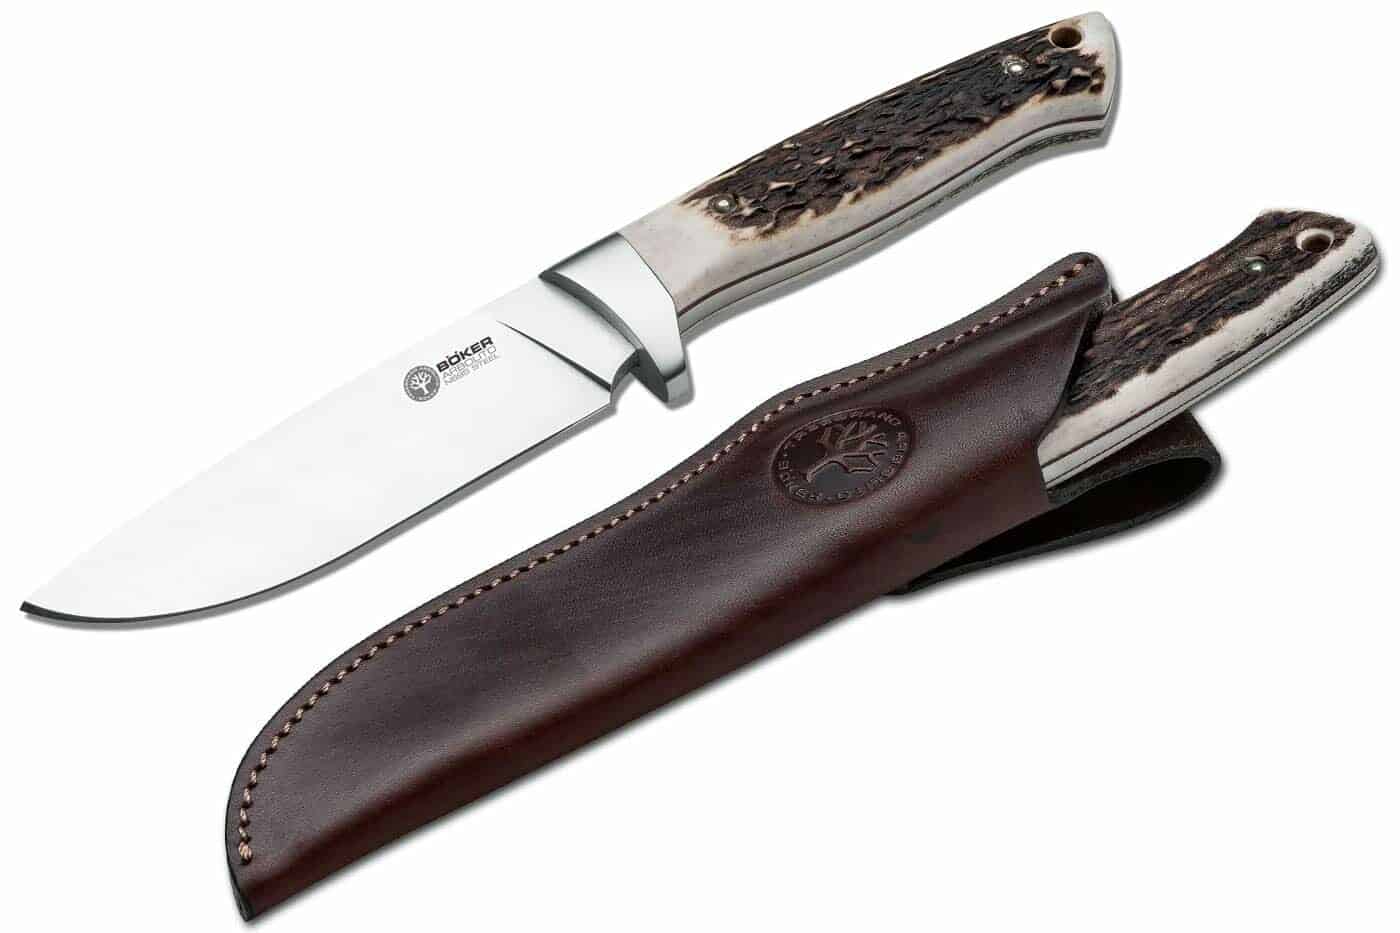 The Boker Arbolito Hunter tactical knife shown both inside and outside the shesth.